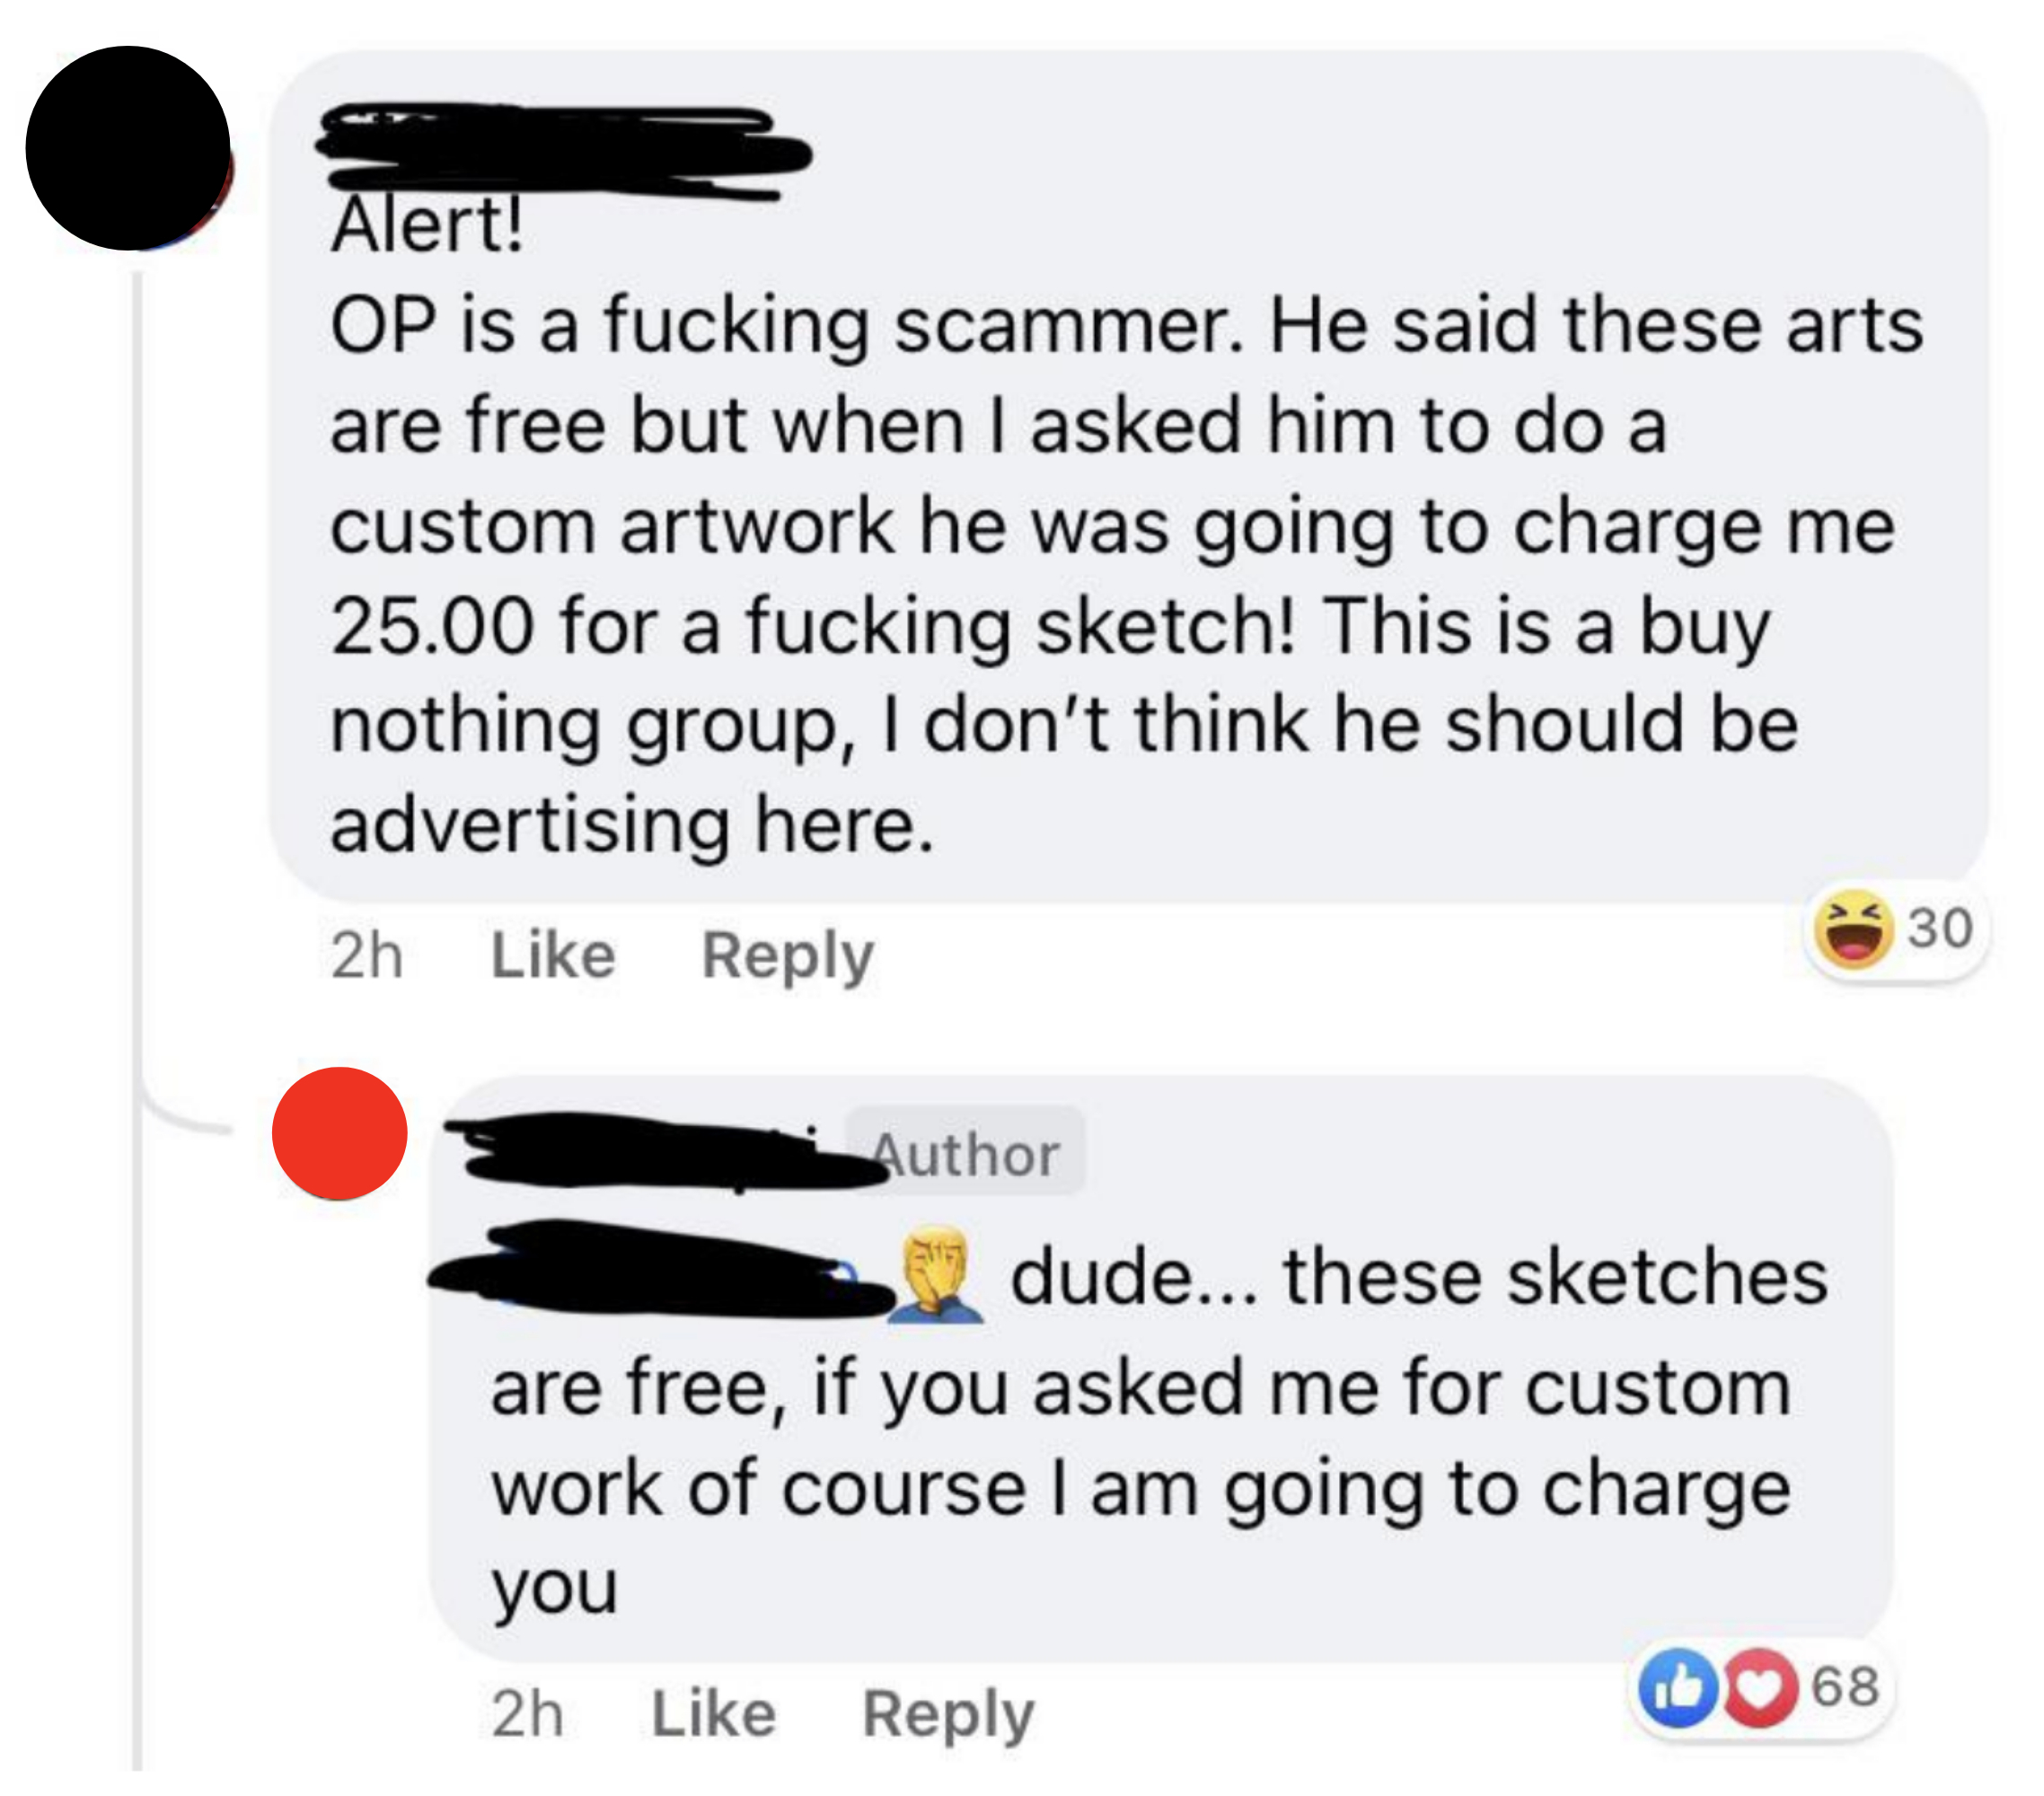 &quot;if you asked me for custom work of course I am going to charge you&quot;